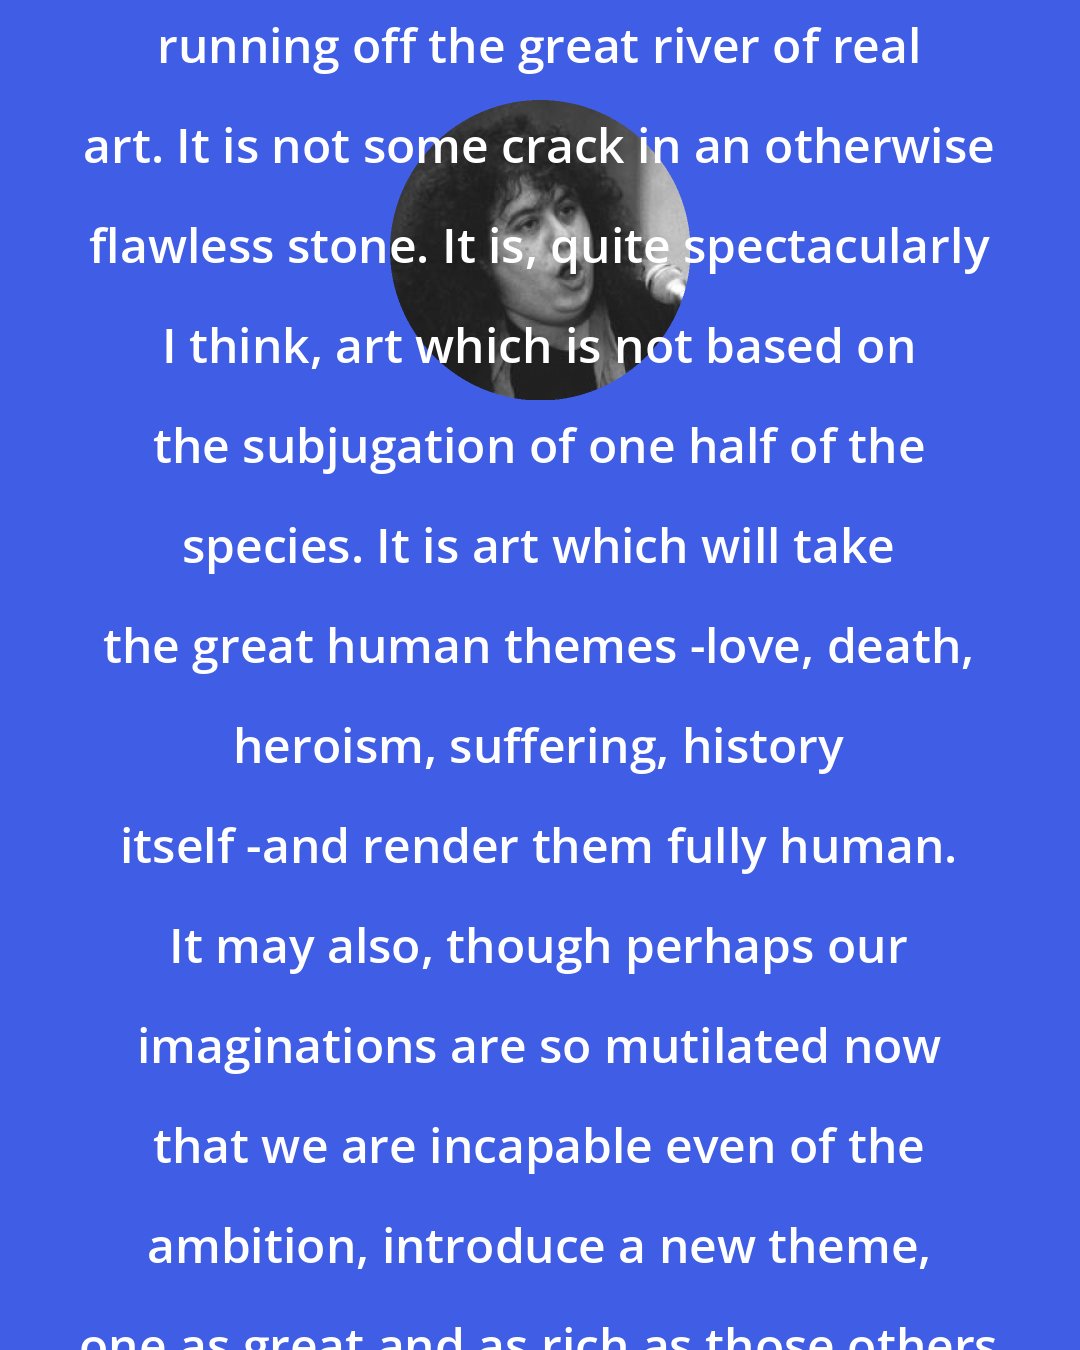 Andrea Dworkin: Feminist art is not some tiny creek running off the great river of real art. It is not some crack in an otherwise flawless stone. It is, quite spectacularly I think, art which is not based on the subjugation of one half of the species. It is art which will take the great human themes -love, death, heroism, suffering, history itself -and render them fully human. It may also, though perhaps our imaginations are so mutilated now that we are incapable even of the ambition, introduce a new theme, one as great and as rich as those others -should we call it joy?